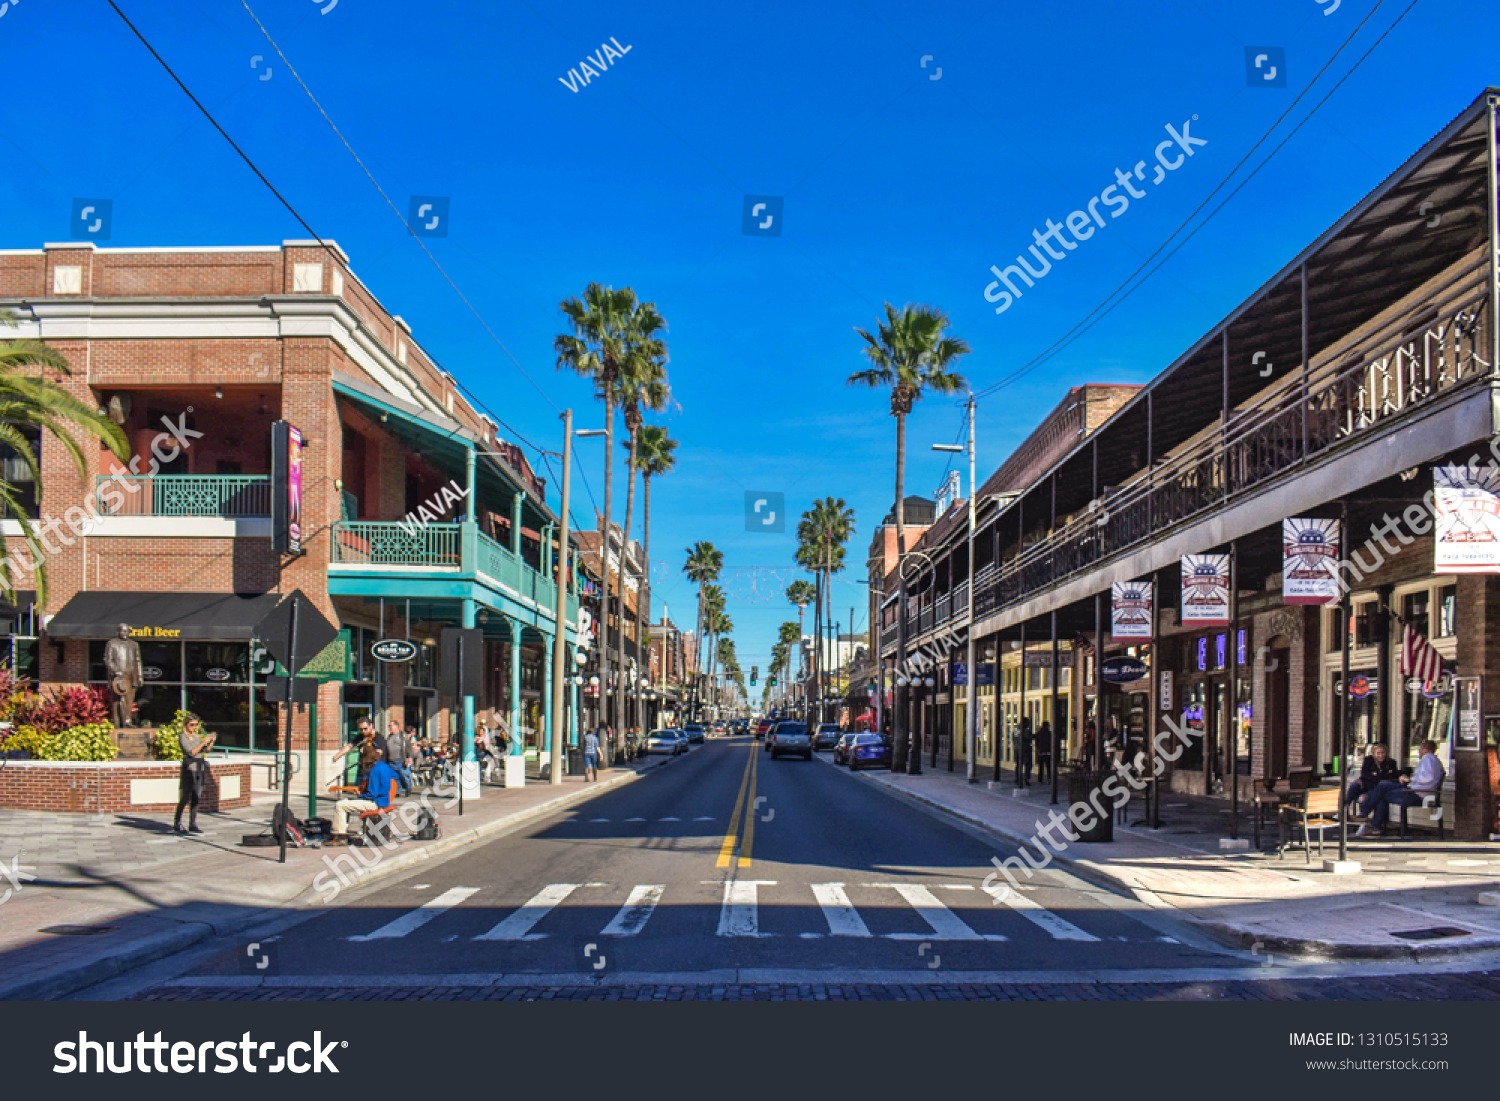 stock-photo-ybor-city-tampa-bay-florida-january-people-enjoying-la-septima-th-ave-in-old-town-1310515133  - Sextant Marketing